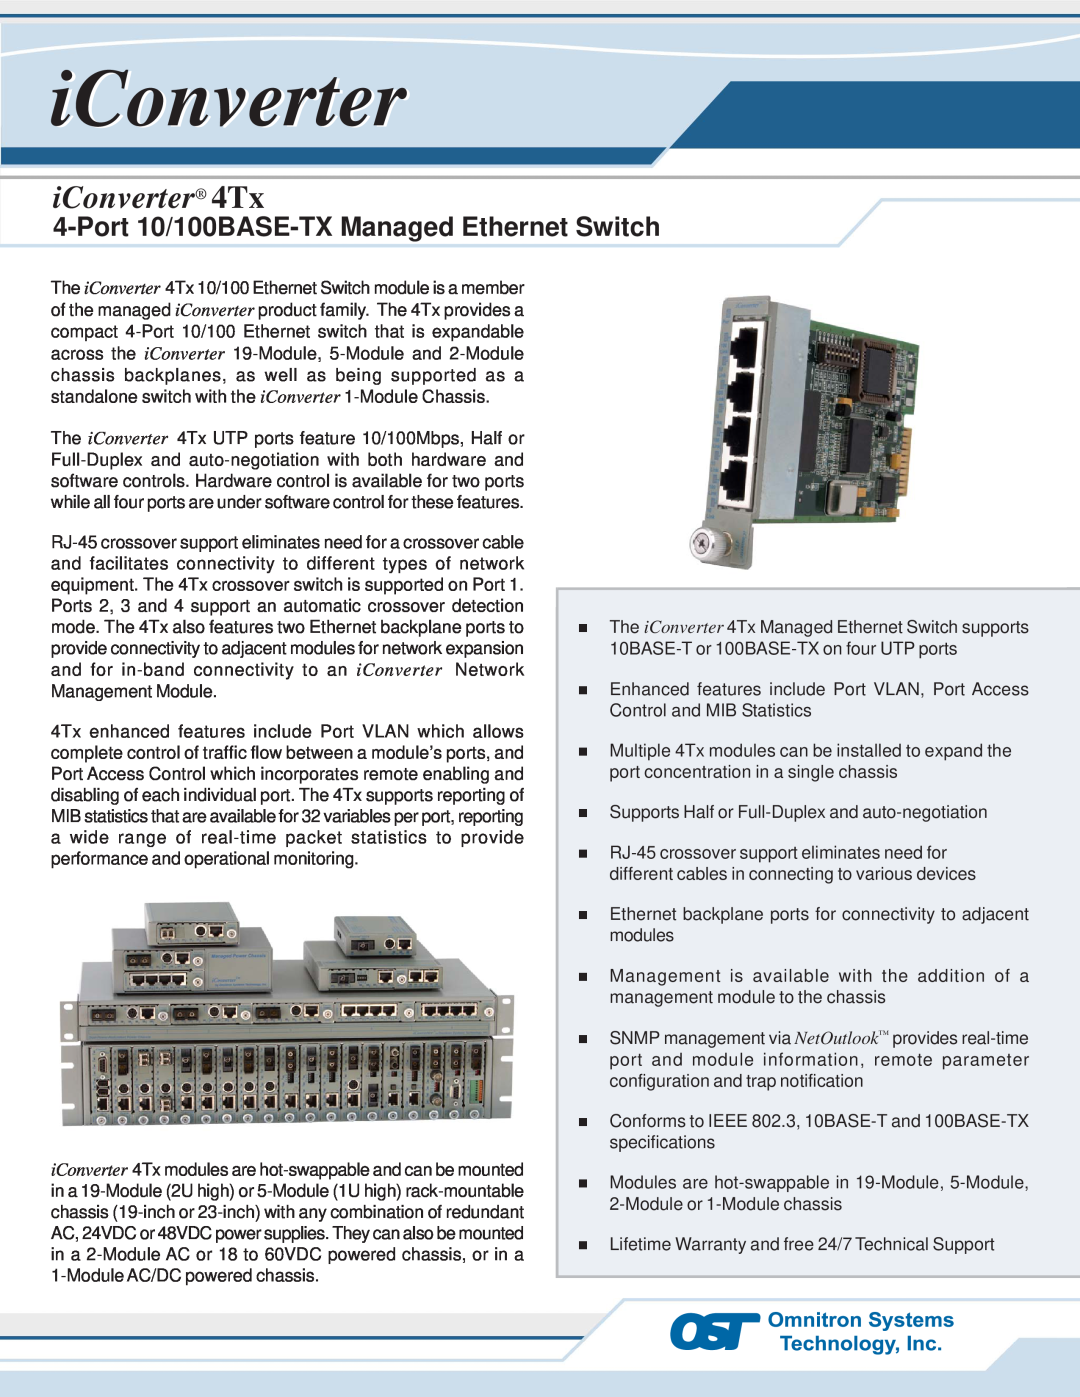 Omnitron Systems Technology specifications iConverter 4Tx, Port 10/100BASE-TX Managed Ethernet Switch 